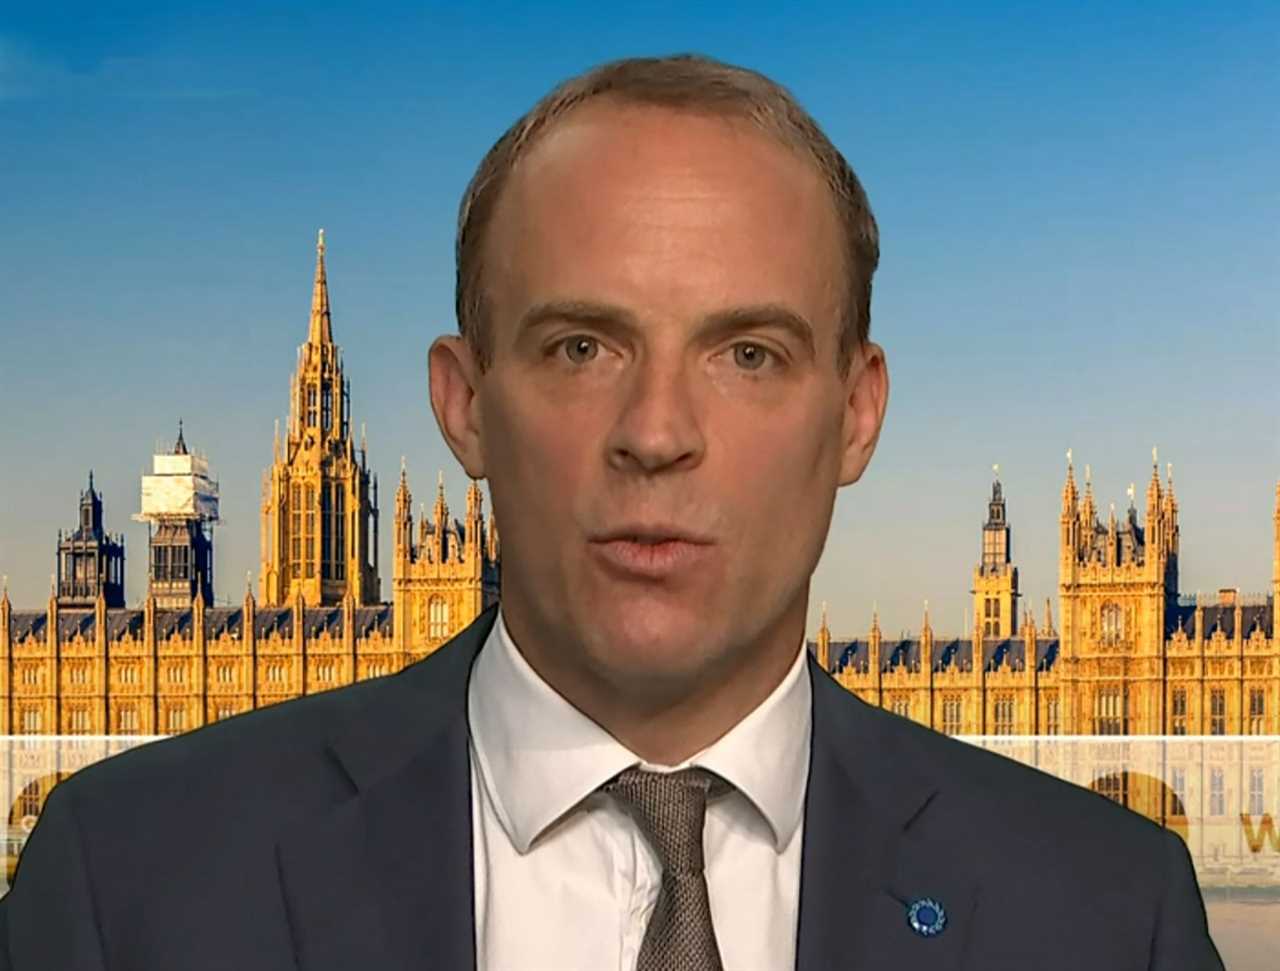 Tory rebels trying to oust Boris Johnson are going against the public, says Dominic Raab